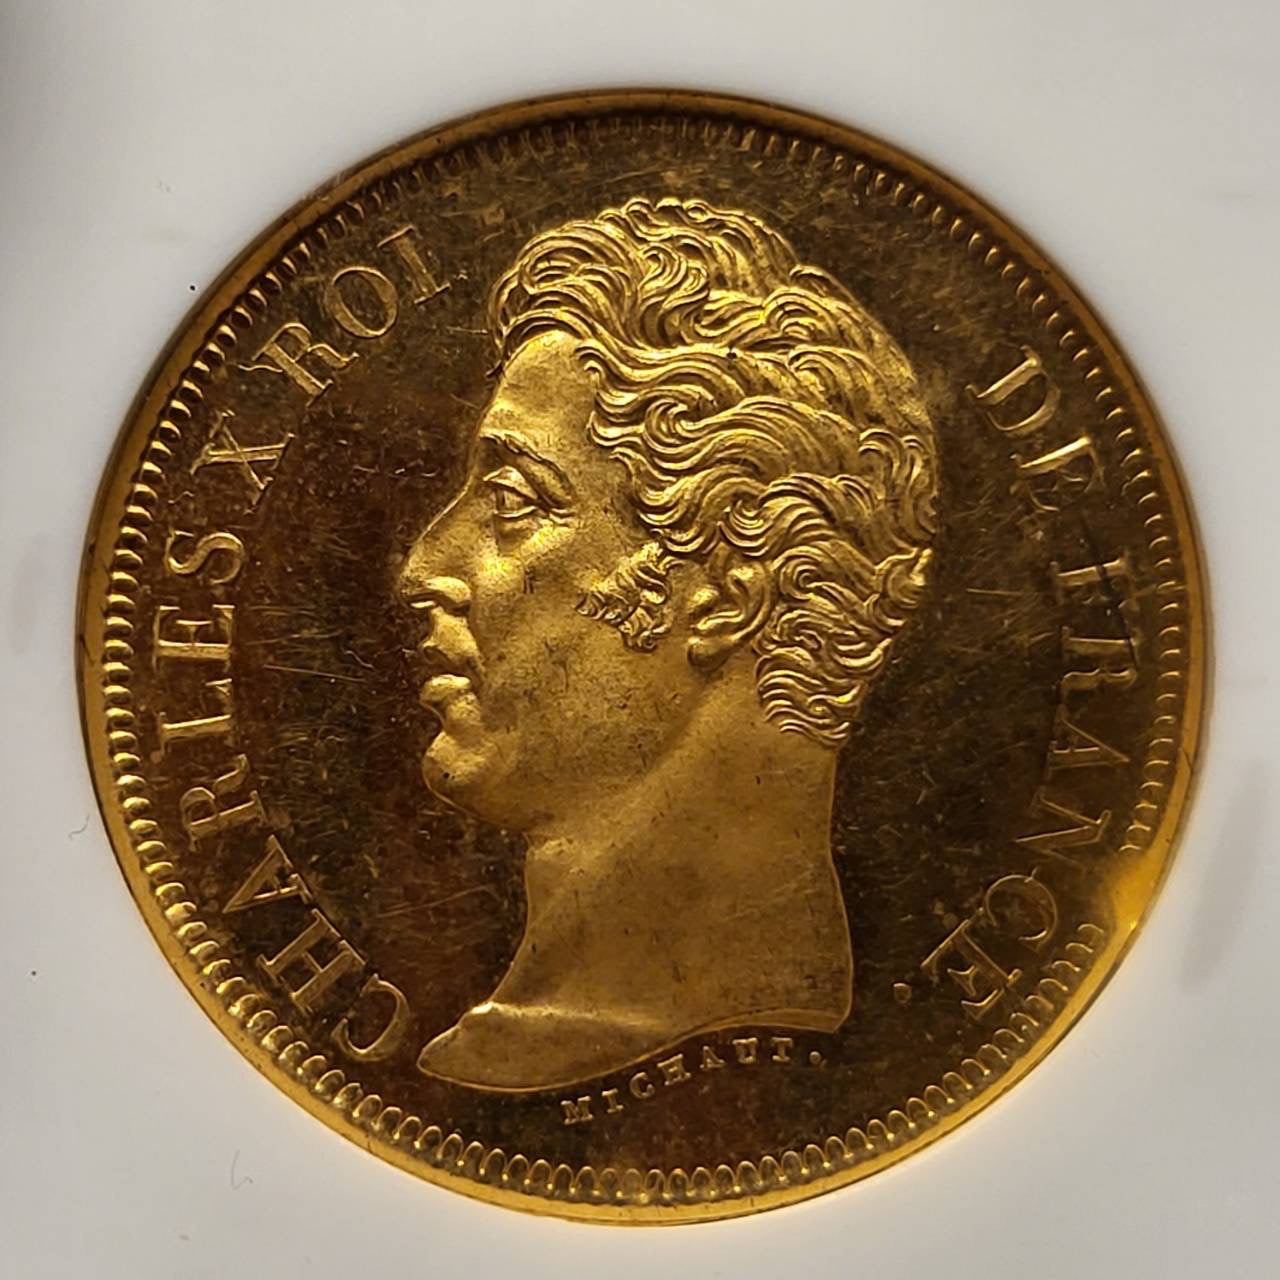 [Unique Coin] France Essai 5 Fr 1824 (UNLIST, Pattern) PF-64 (ASK for Purchase) 